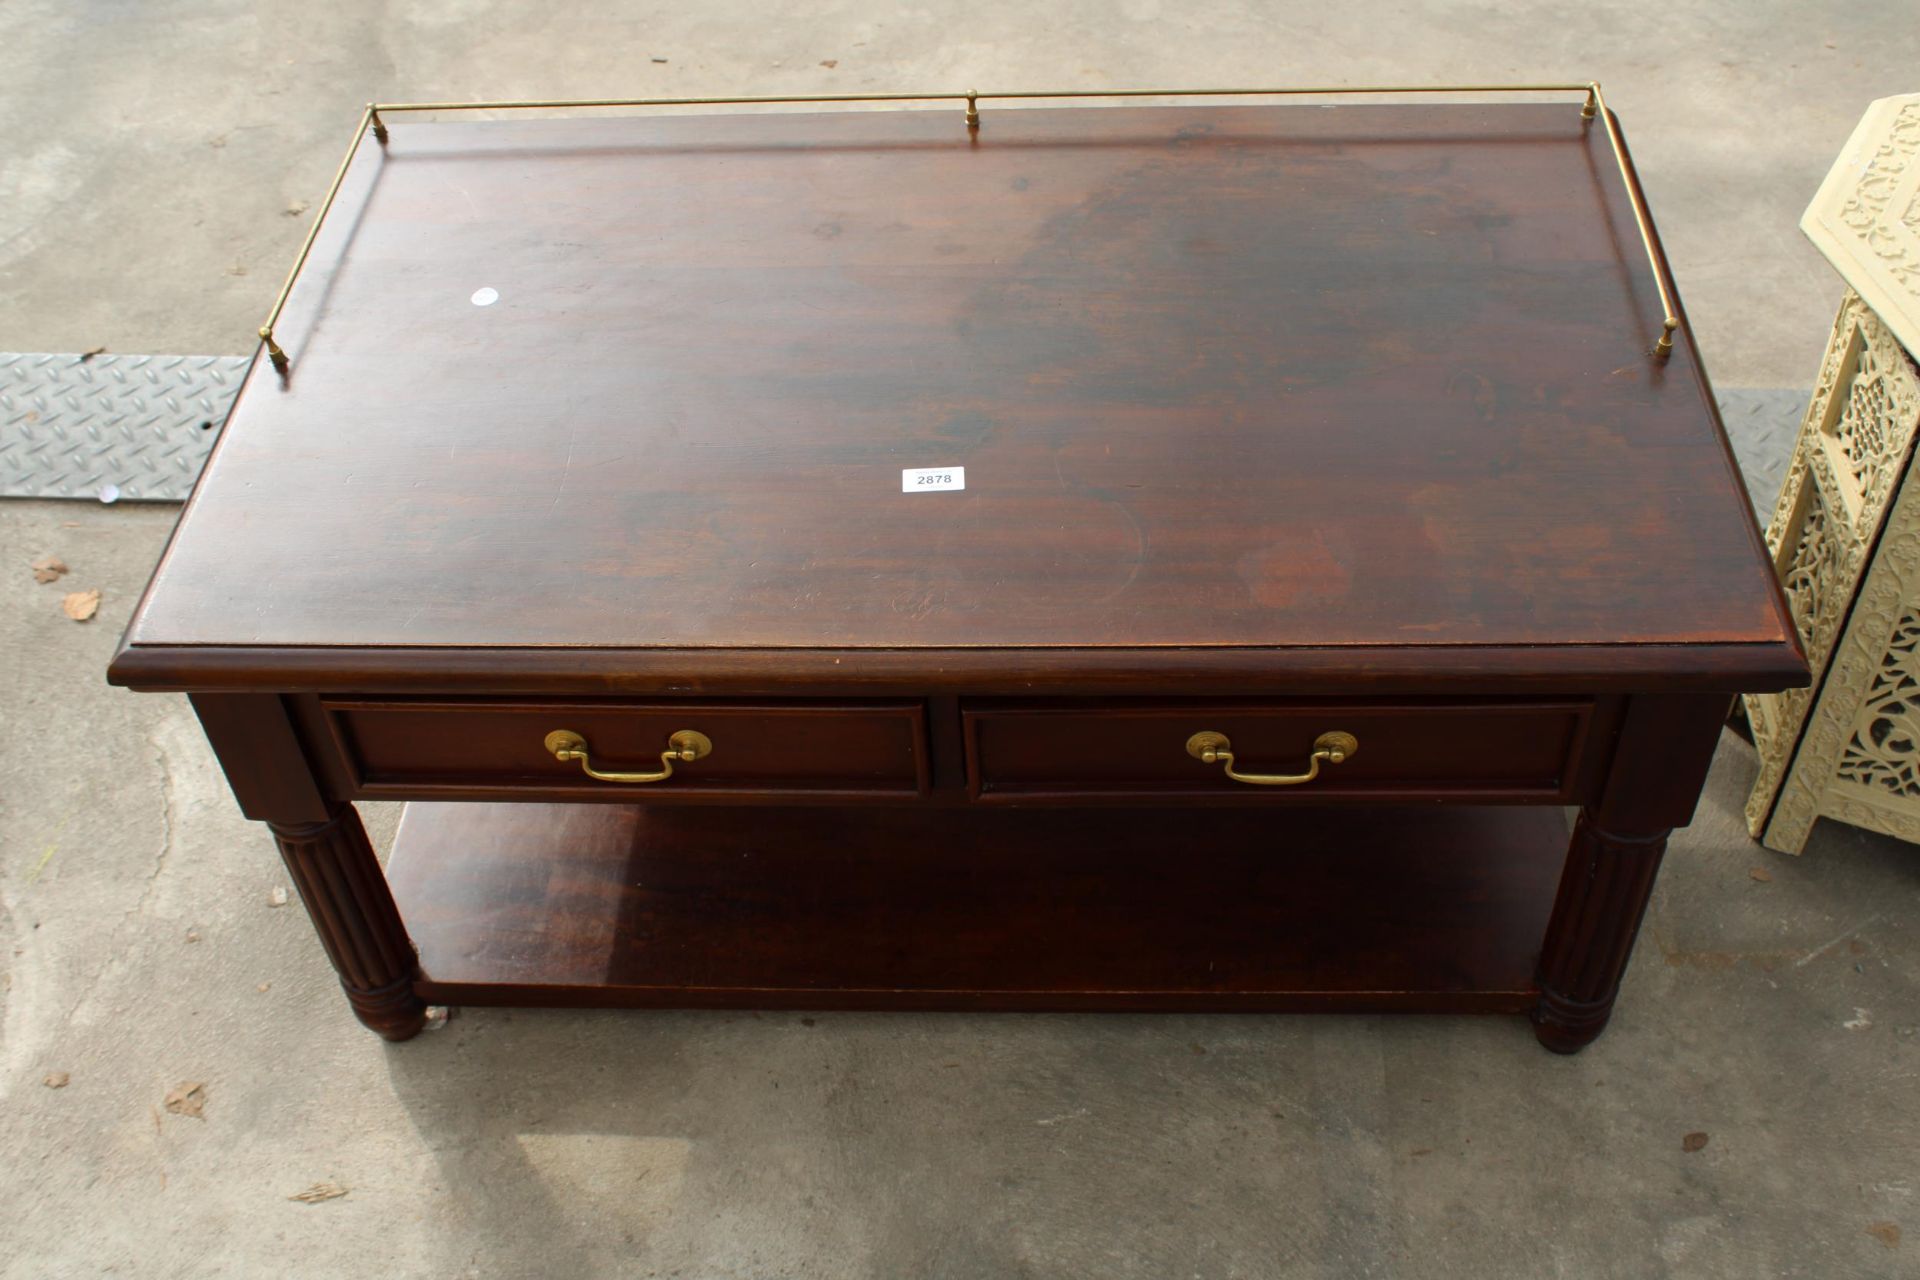 A MODERN HARDWOOD LOW SIDE TABLE WITH TWO DRAWERS AND BRASS GALLERY, 39" WIDE